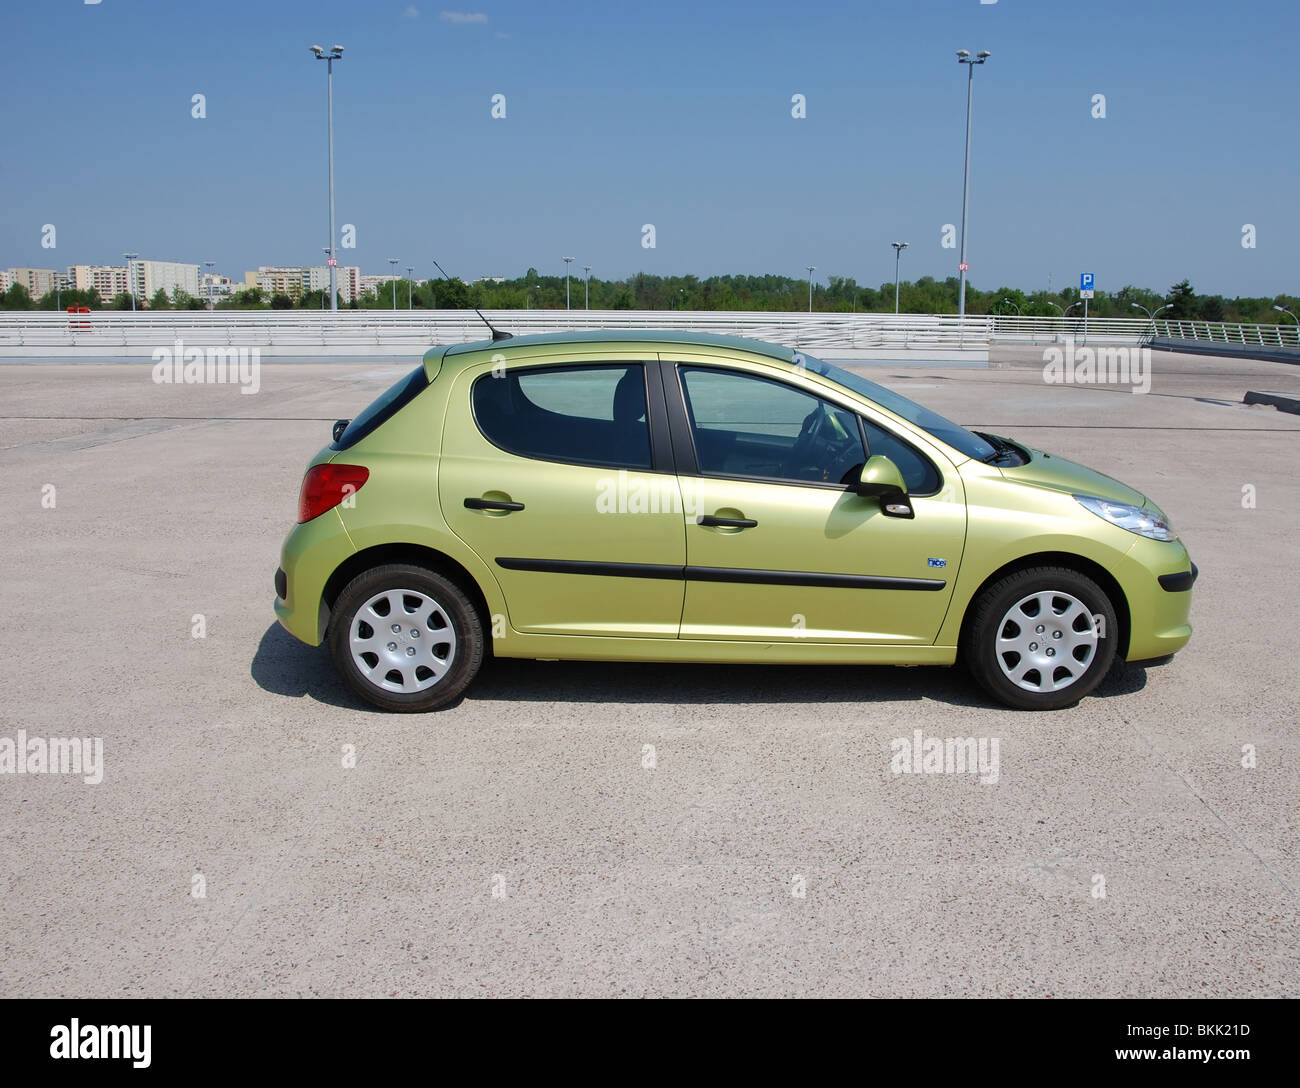 Peugeot 207 1.4 - 2009 (FL) - yellow metallic - three doors (3D) - French popular subcompact city car - on parking space Stock Photo